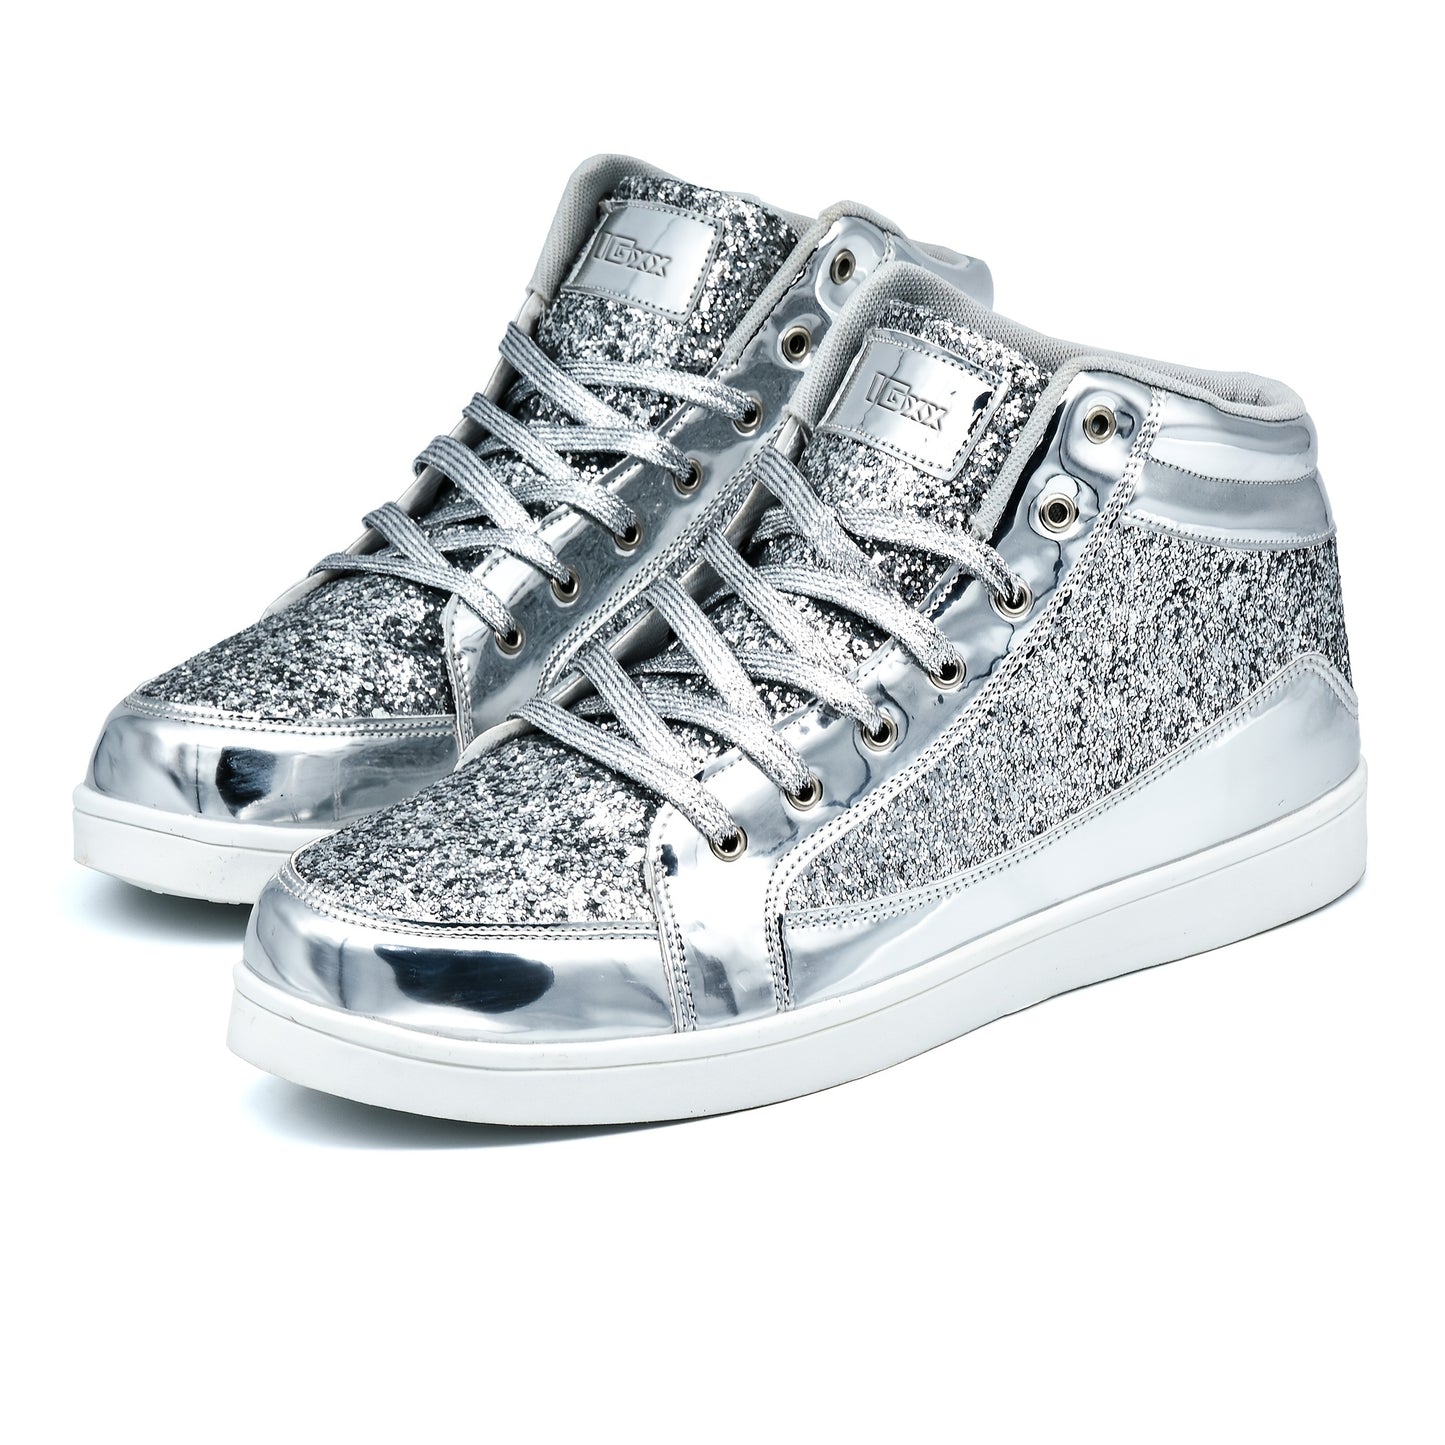 Men's High Top Sequin Shoes, Fashion Shiny Casual Sneakers For Parties & Discos, Golden\u002FSilver